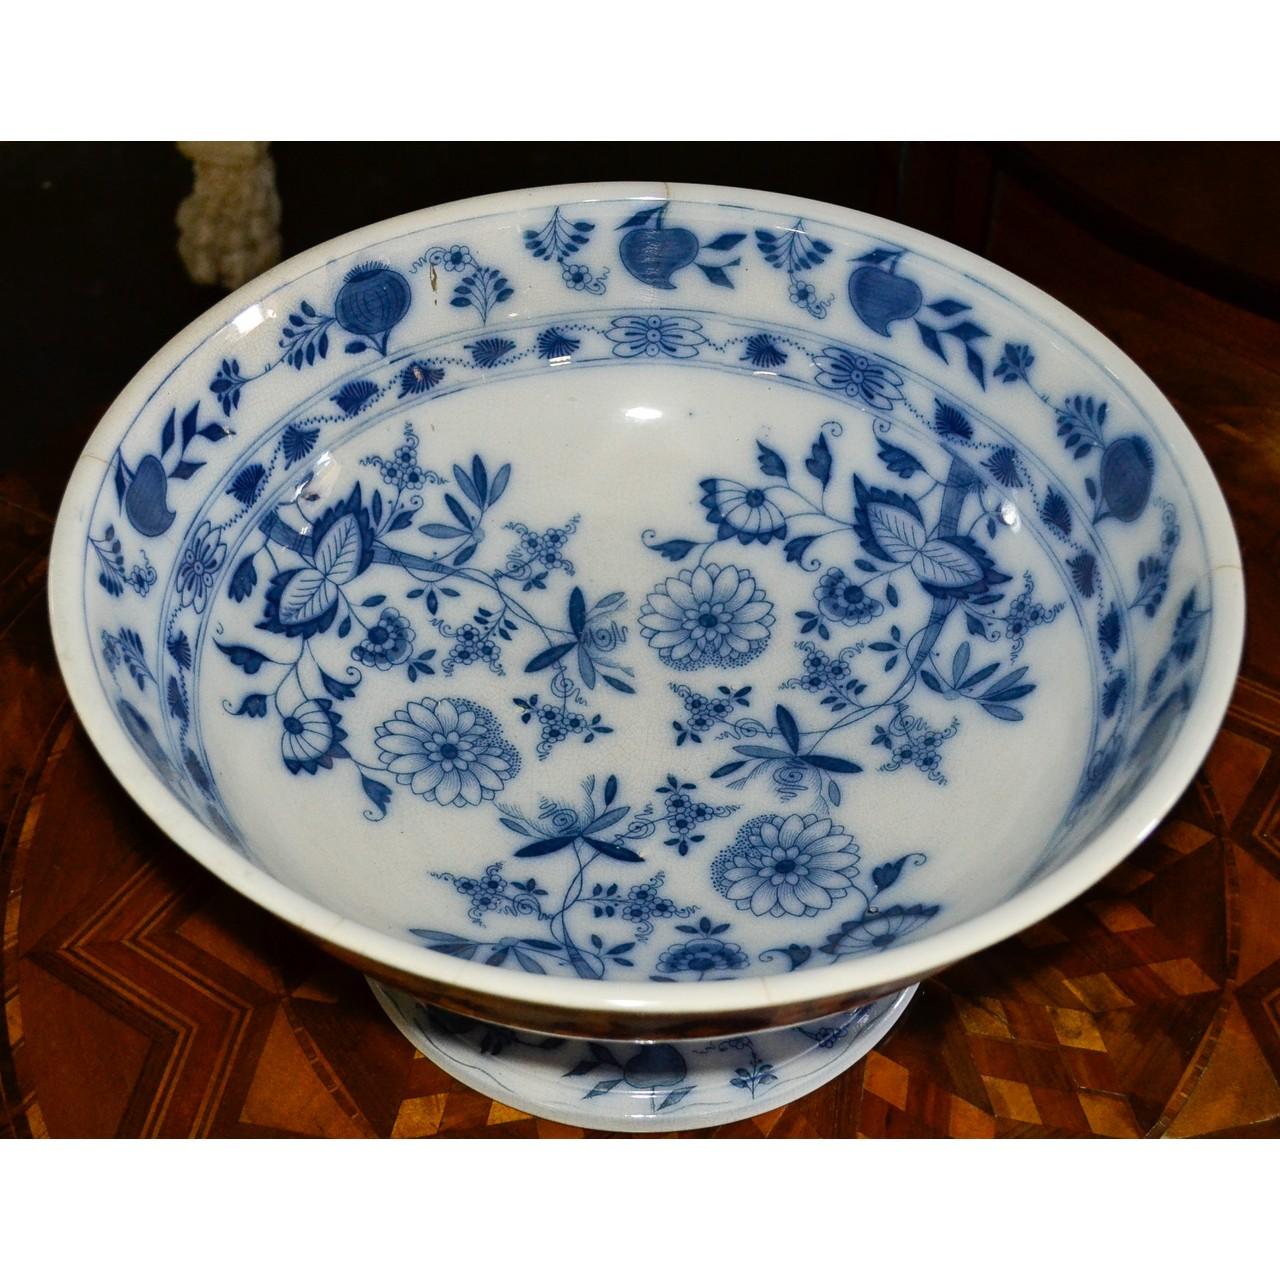 This gorgeous blue and white Dresden collectible bowl was made in England in the early 20th century.
The makers mark is on the bottom of bowl. See last photo for mark.

Measures: 16 inches wide x 8 inches height.